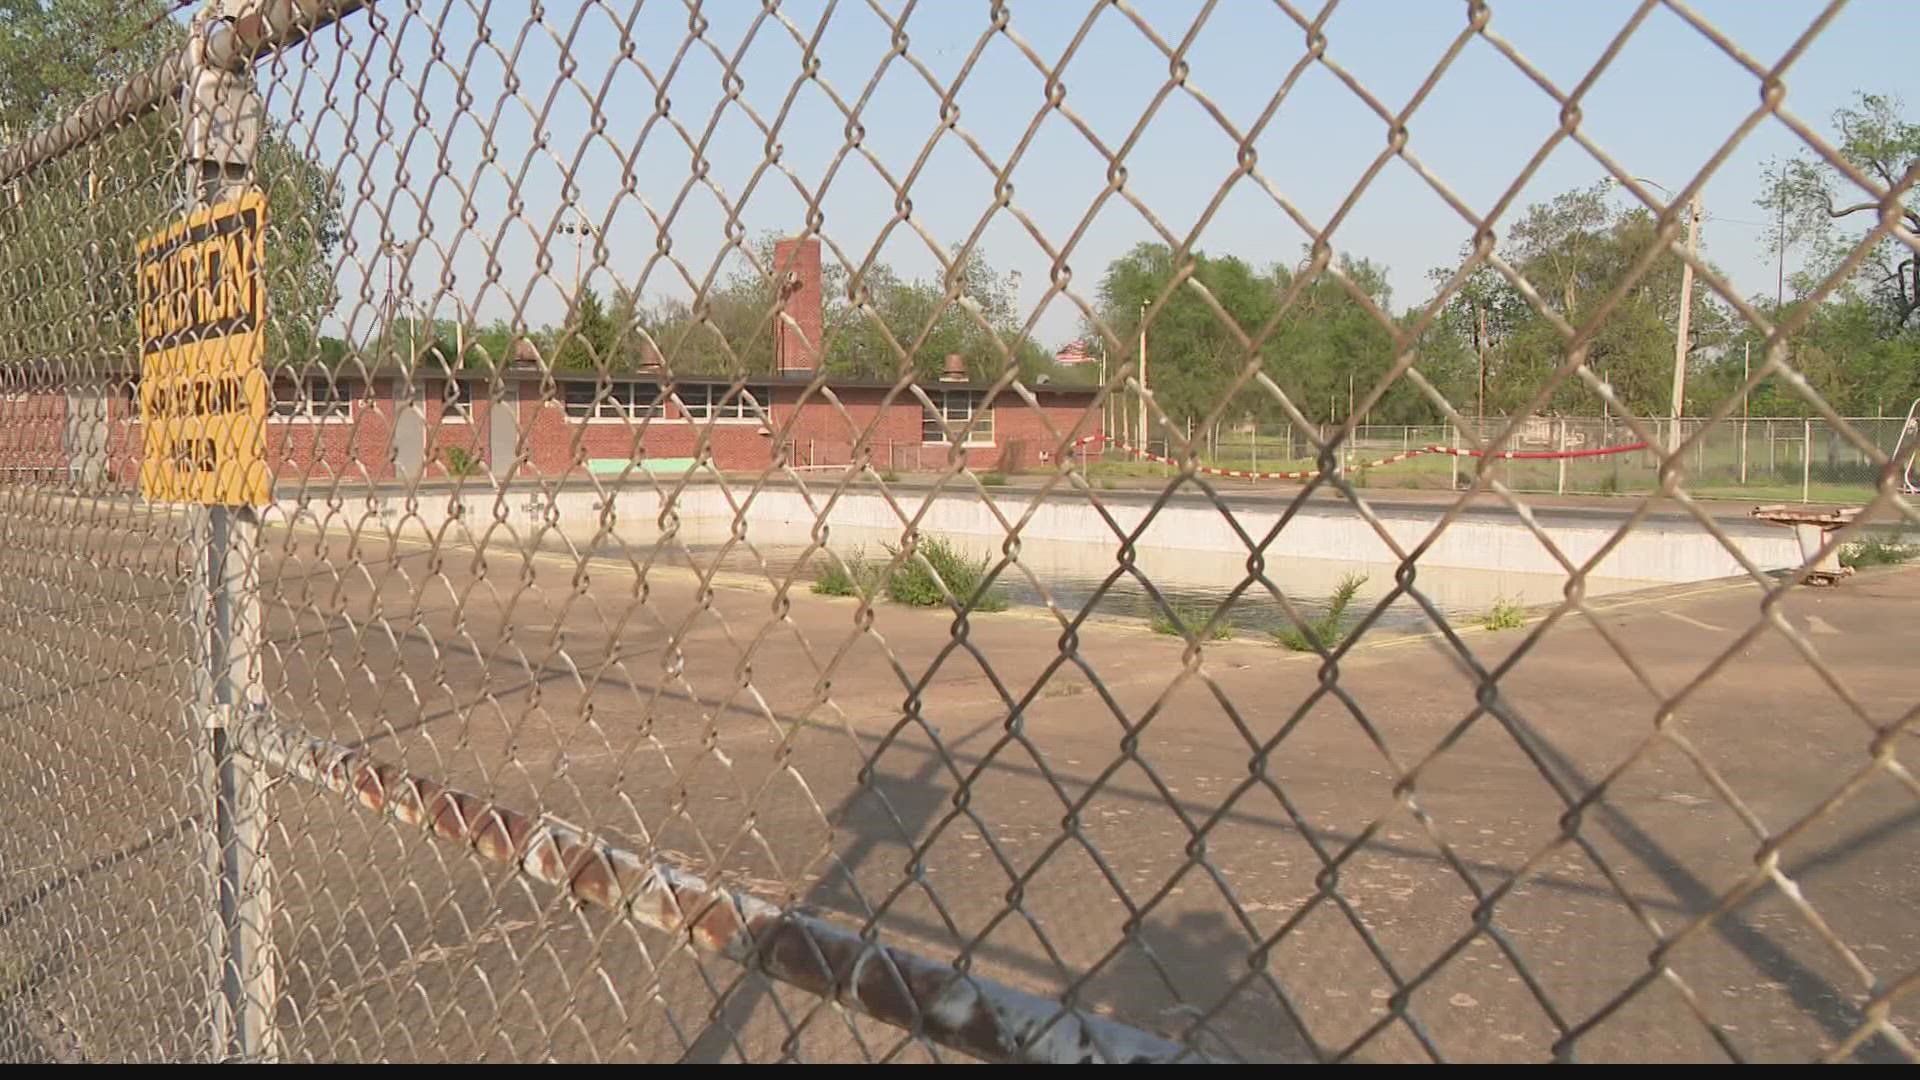 The historic Pop Myles pool has sat vacant for more than a decade. That’s expected to change with extra funds coming from the state.